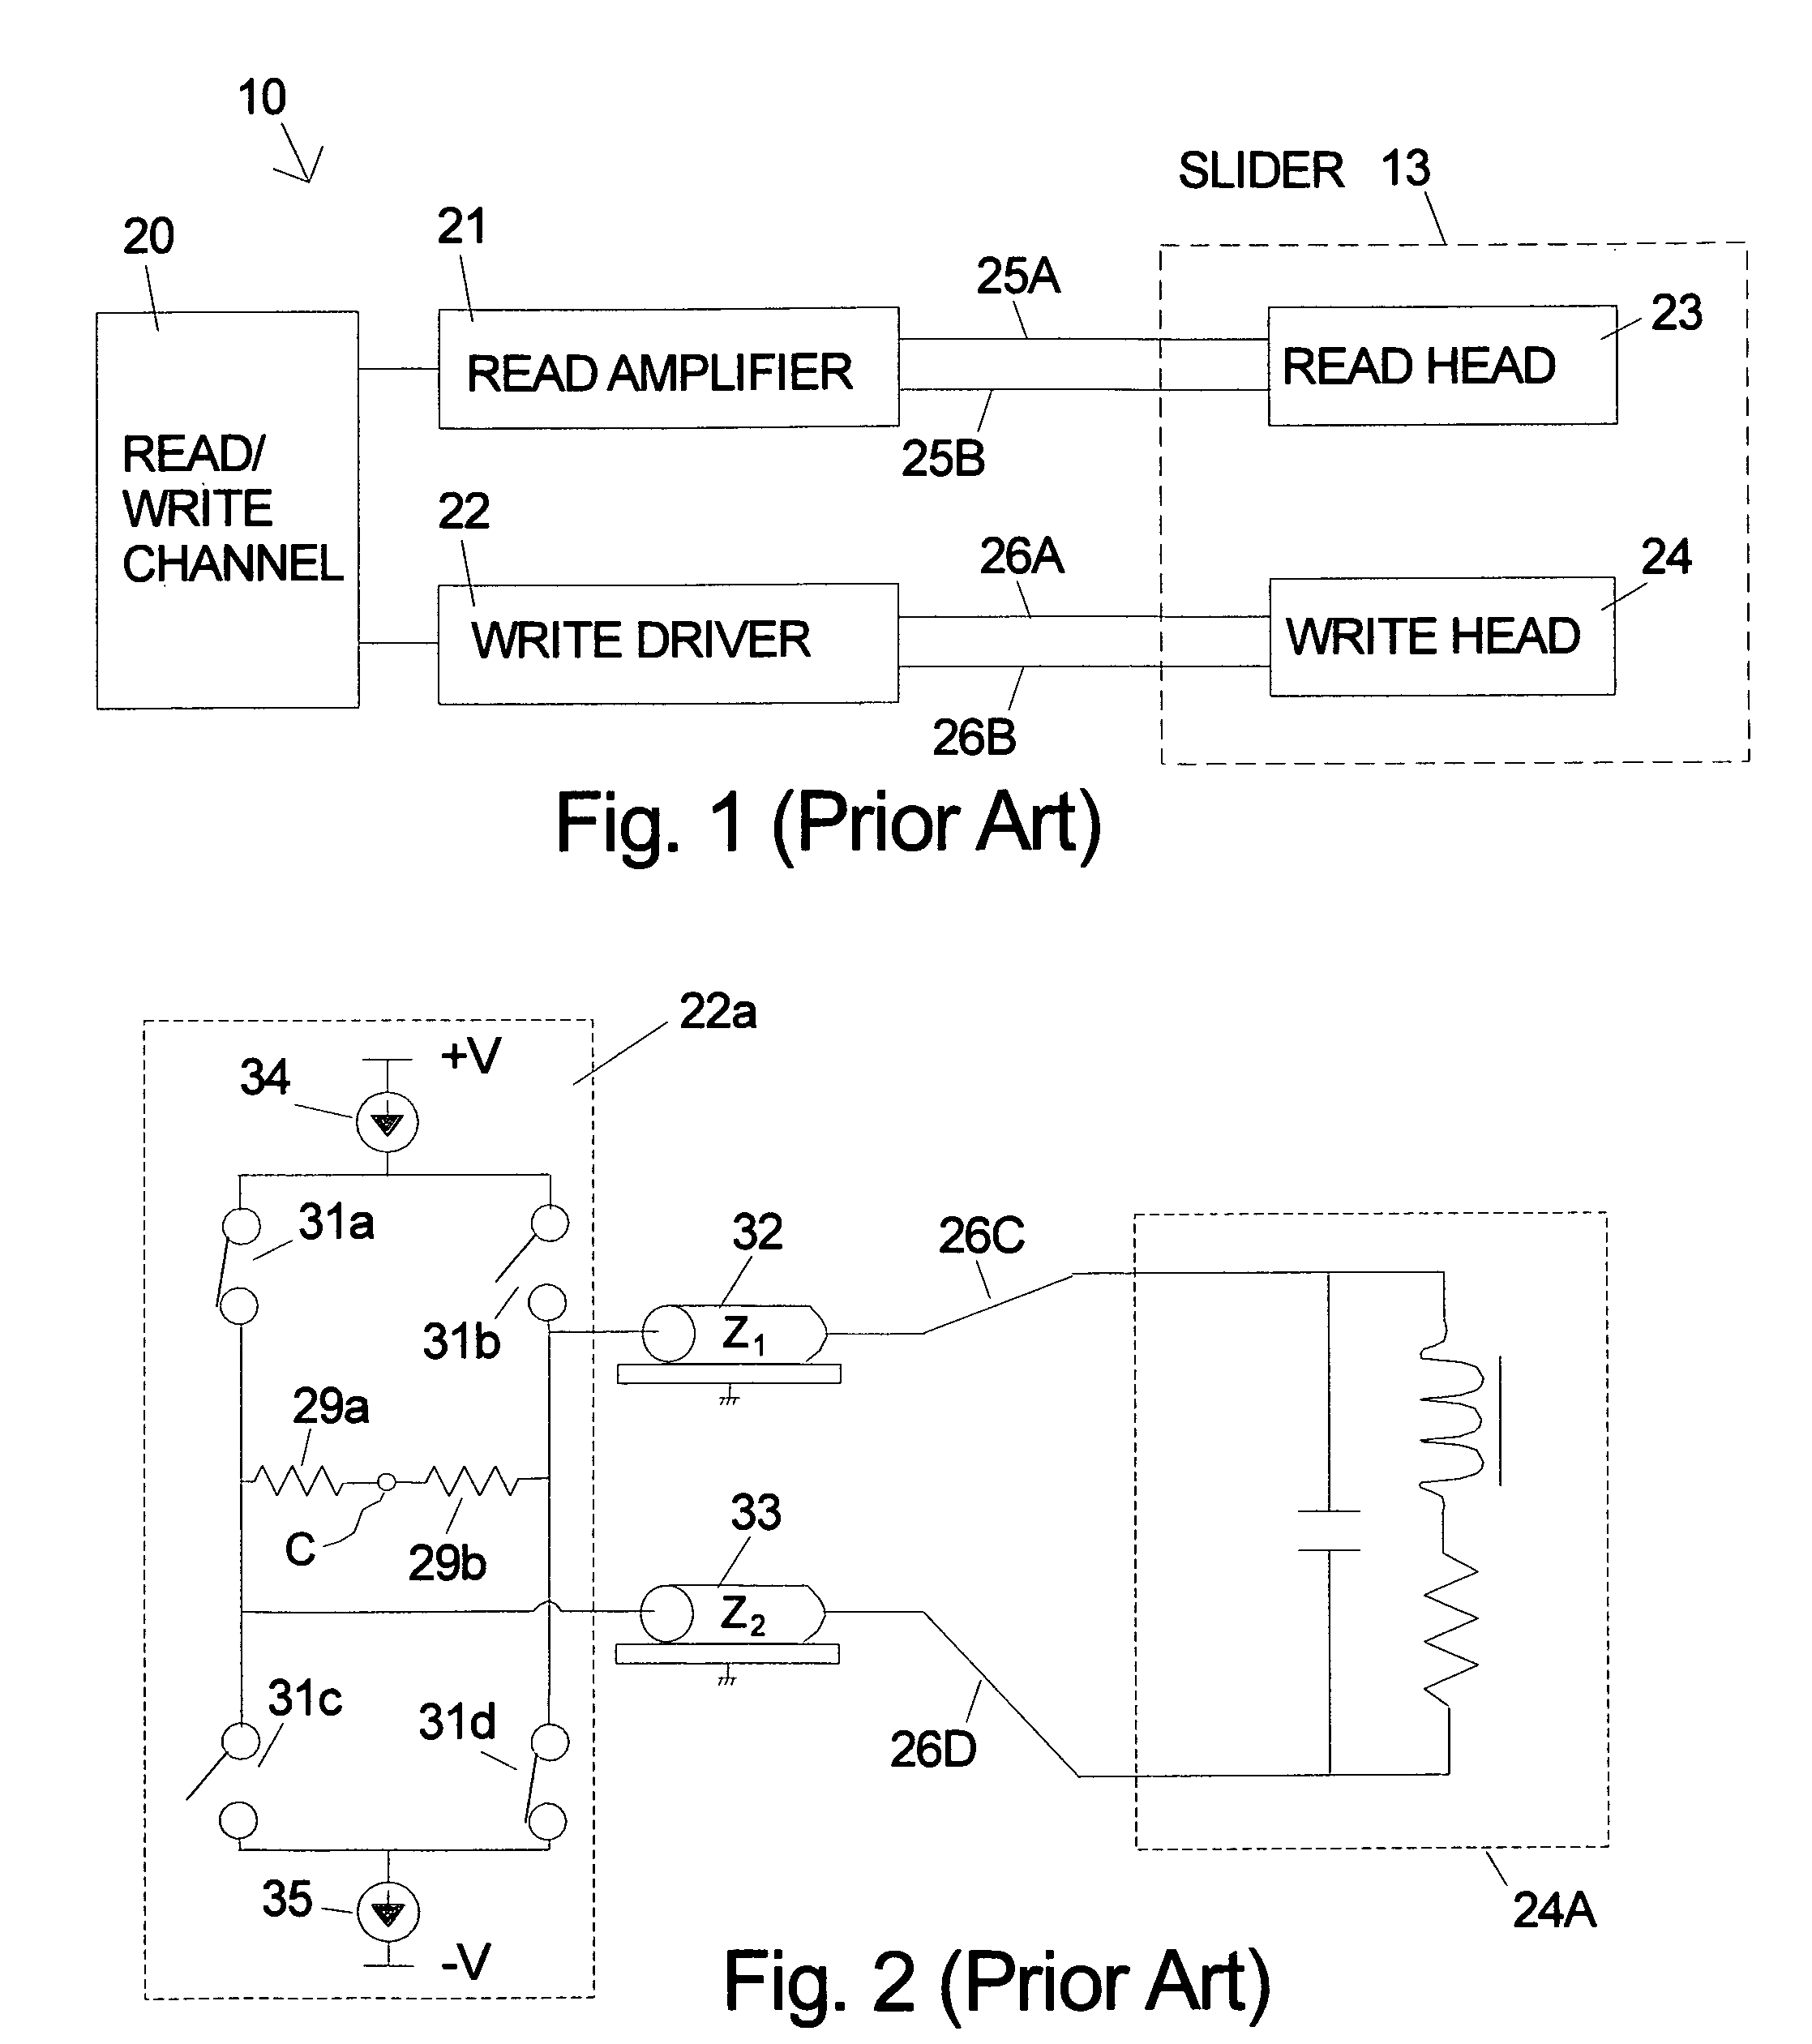 High speed digital signaling apparatus and method using reflected signals to increase total delivered current